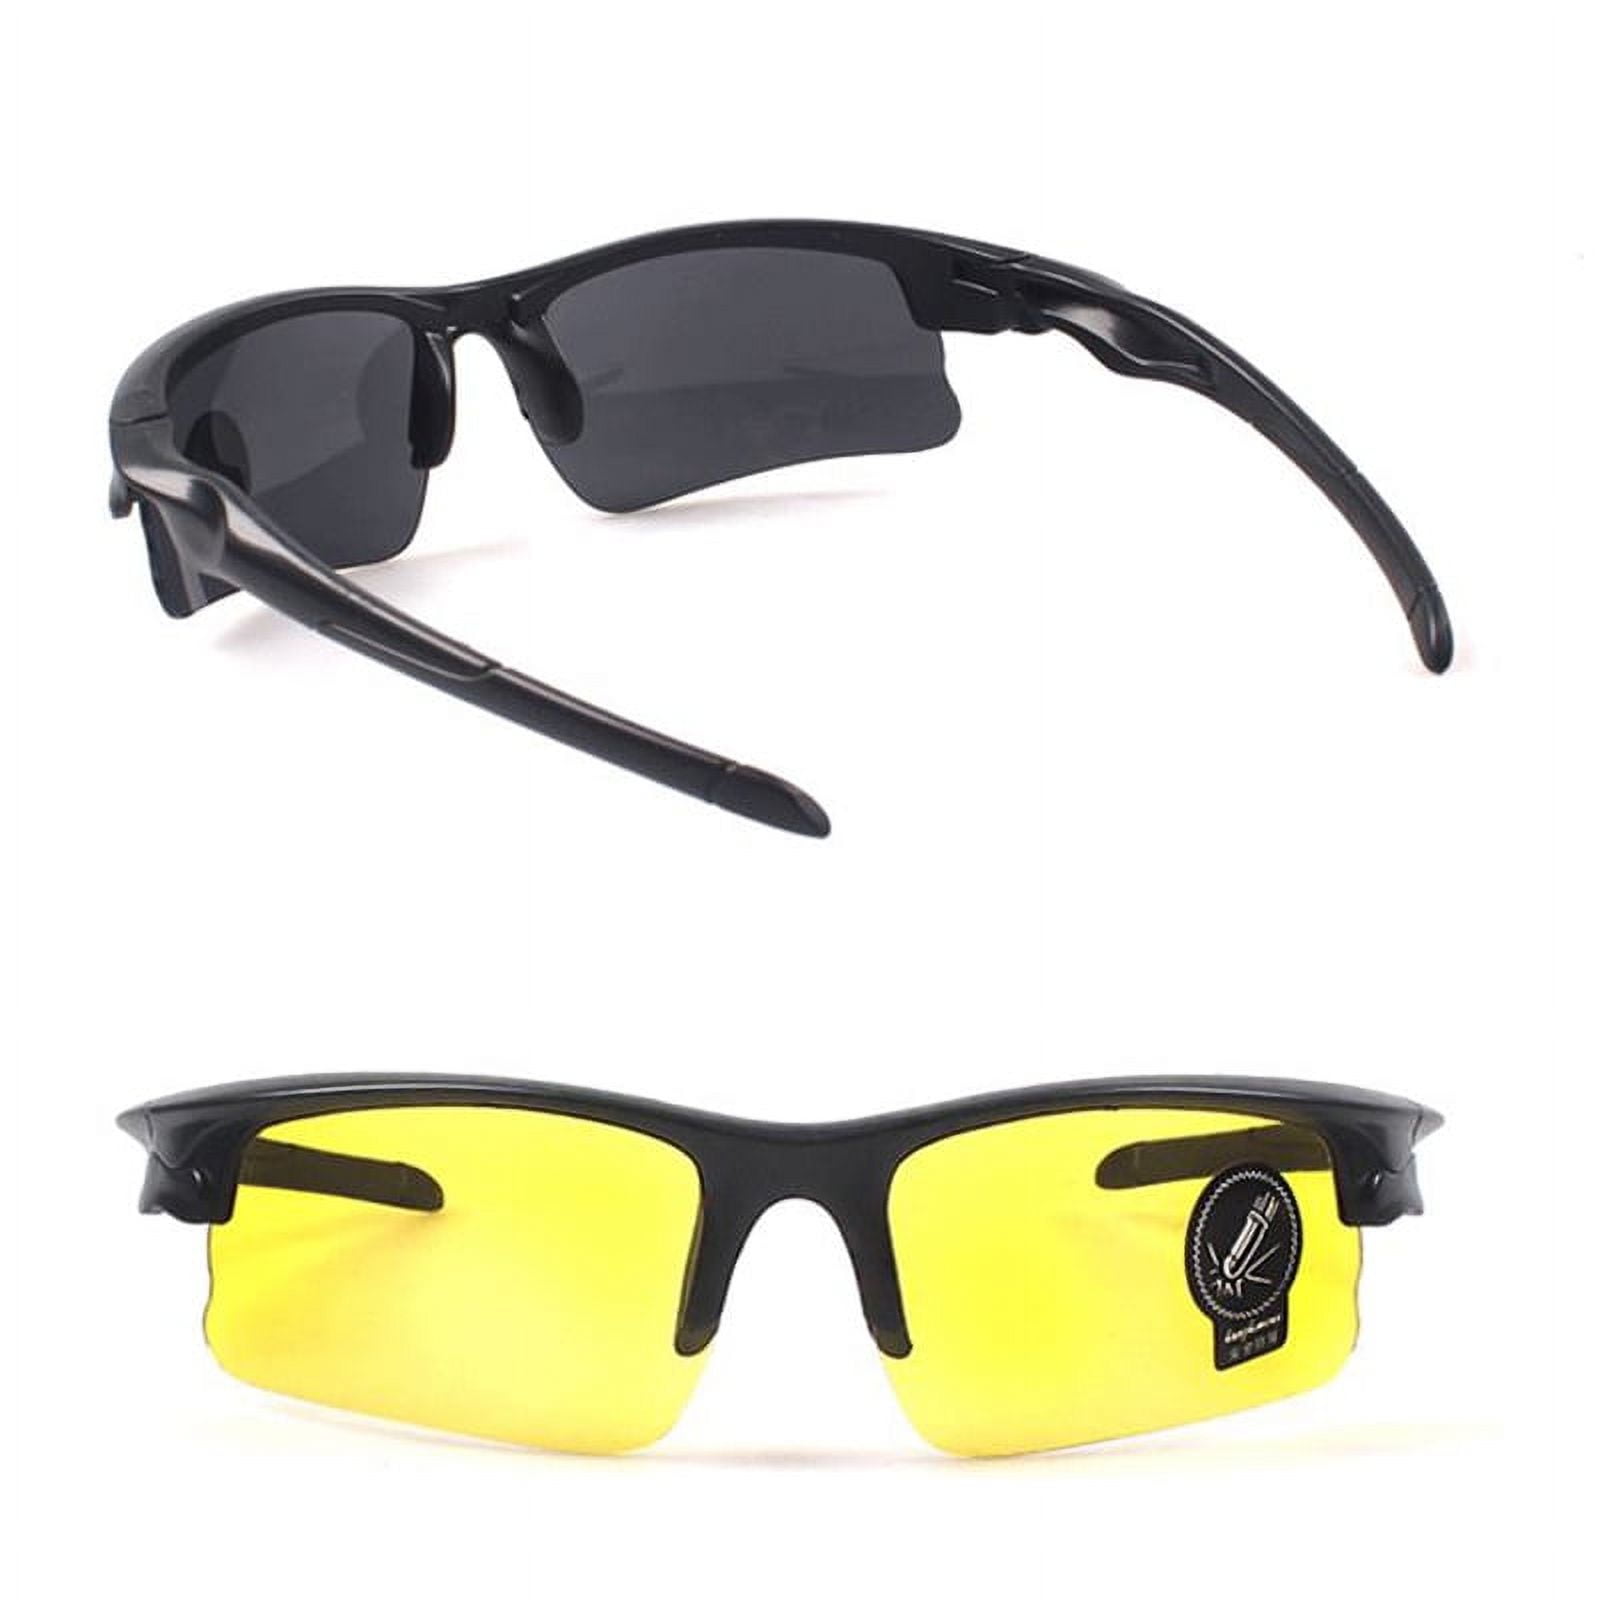 Outdoor Cycling Glasses Sunglasses Sunglasses 3106 Yellow Lenses Men  Driving Polarized Sunglasses Keep Your Eyes From Wind & Dust Large Pc Frame  Night Vision Sunglasses New 